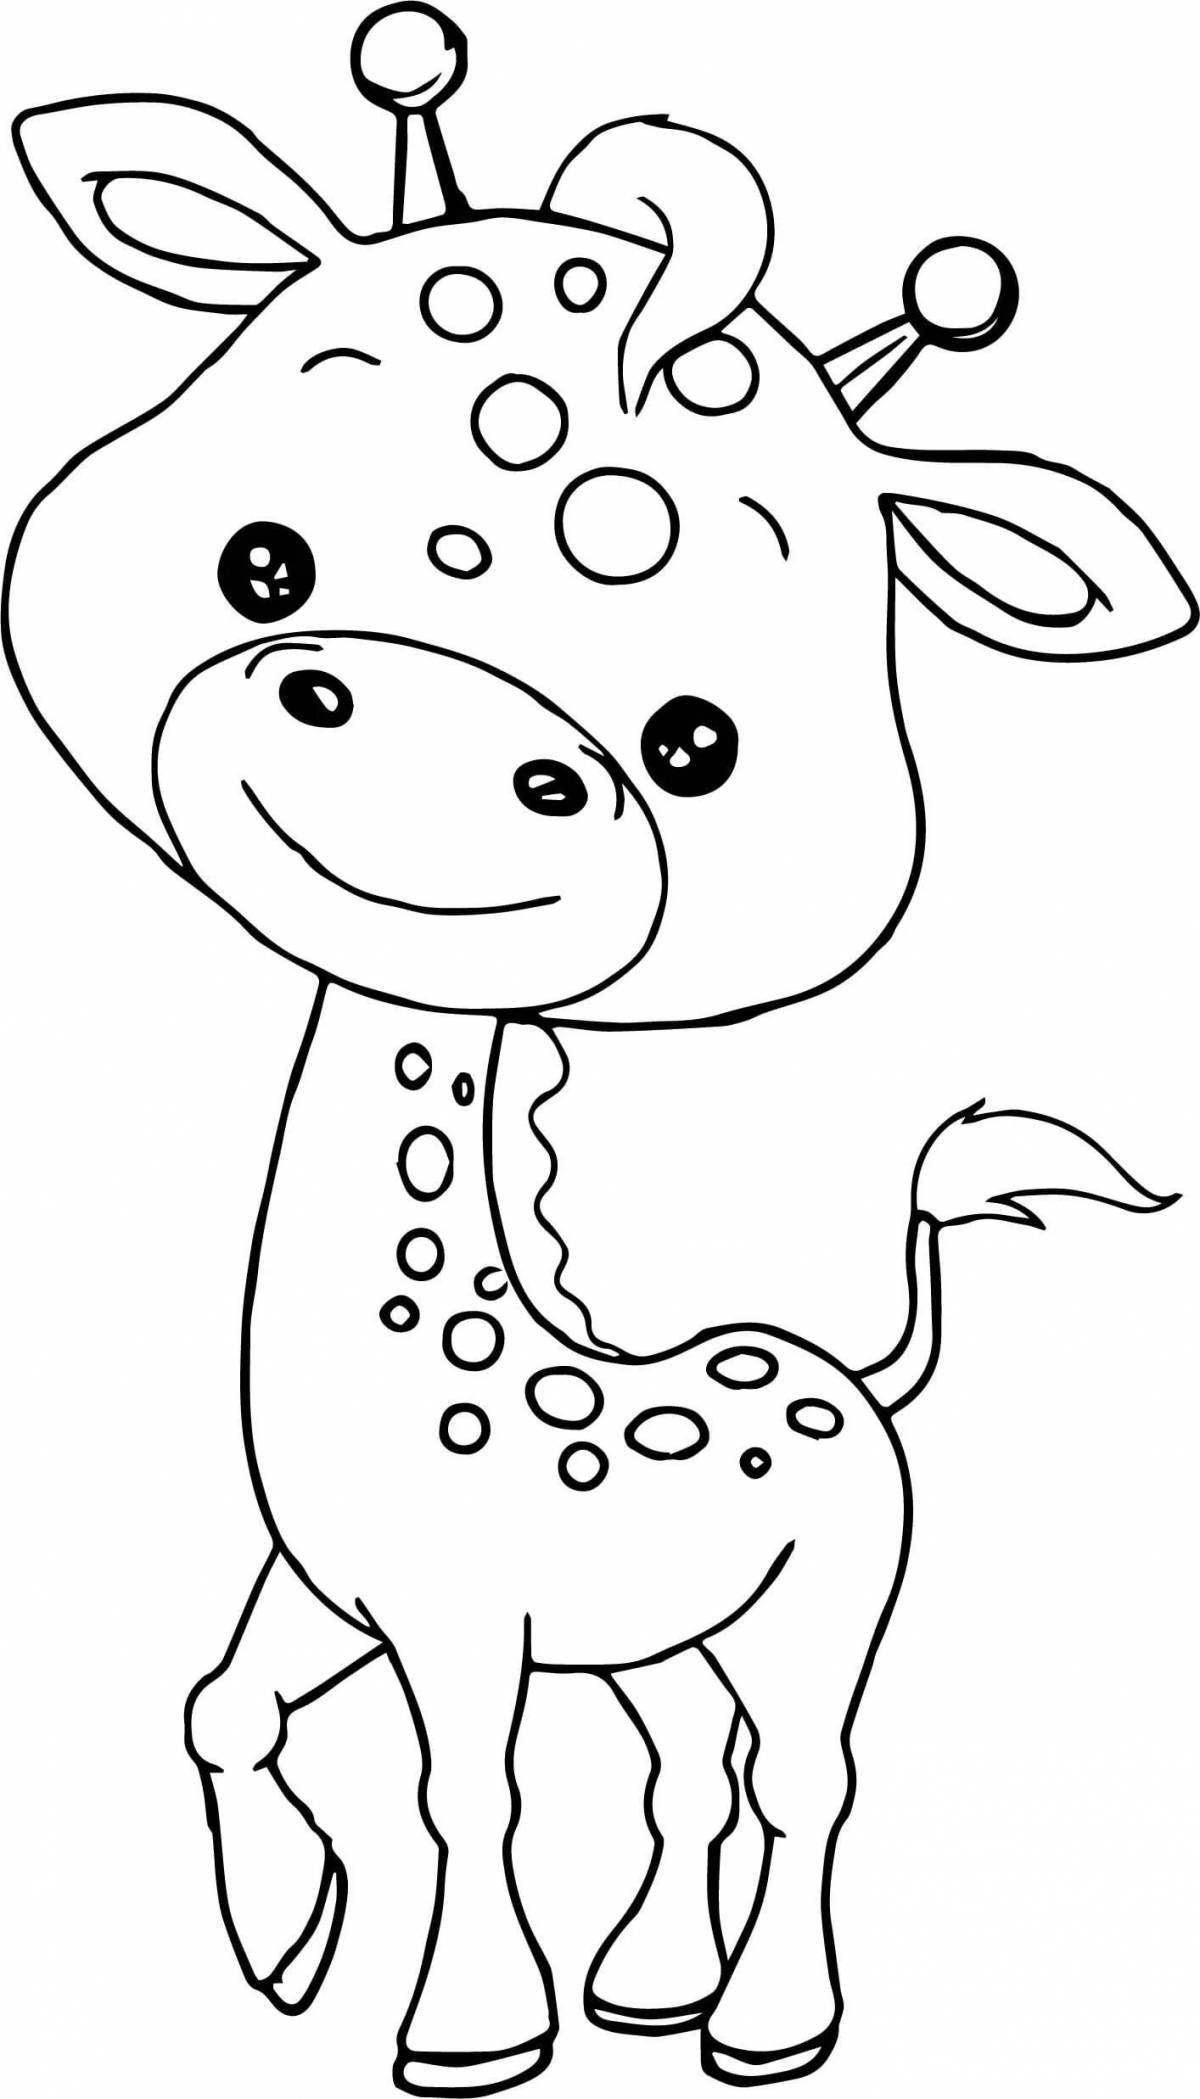 Fluffy baby animal coloring pages